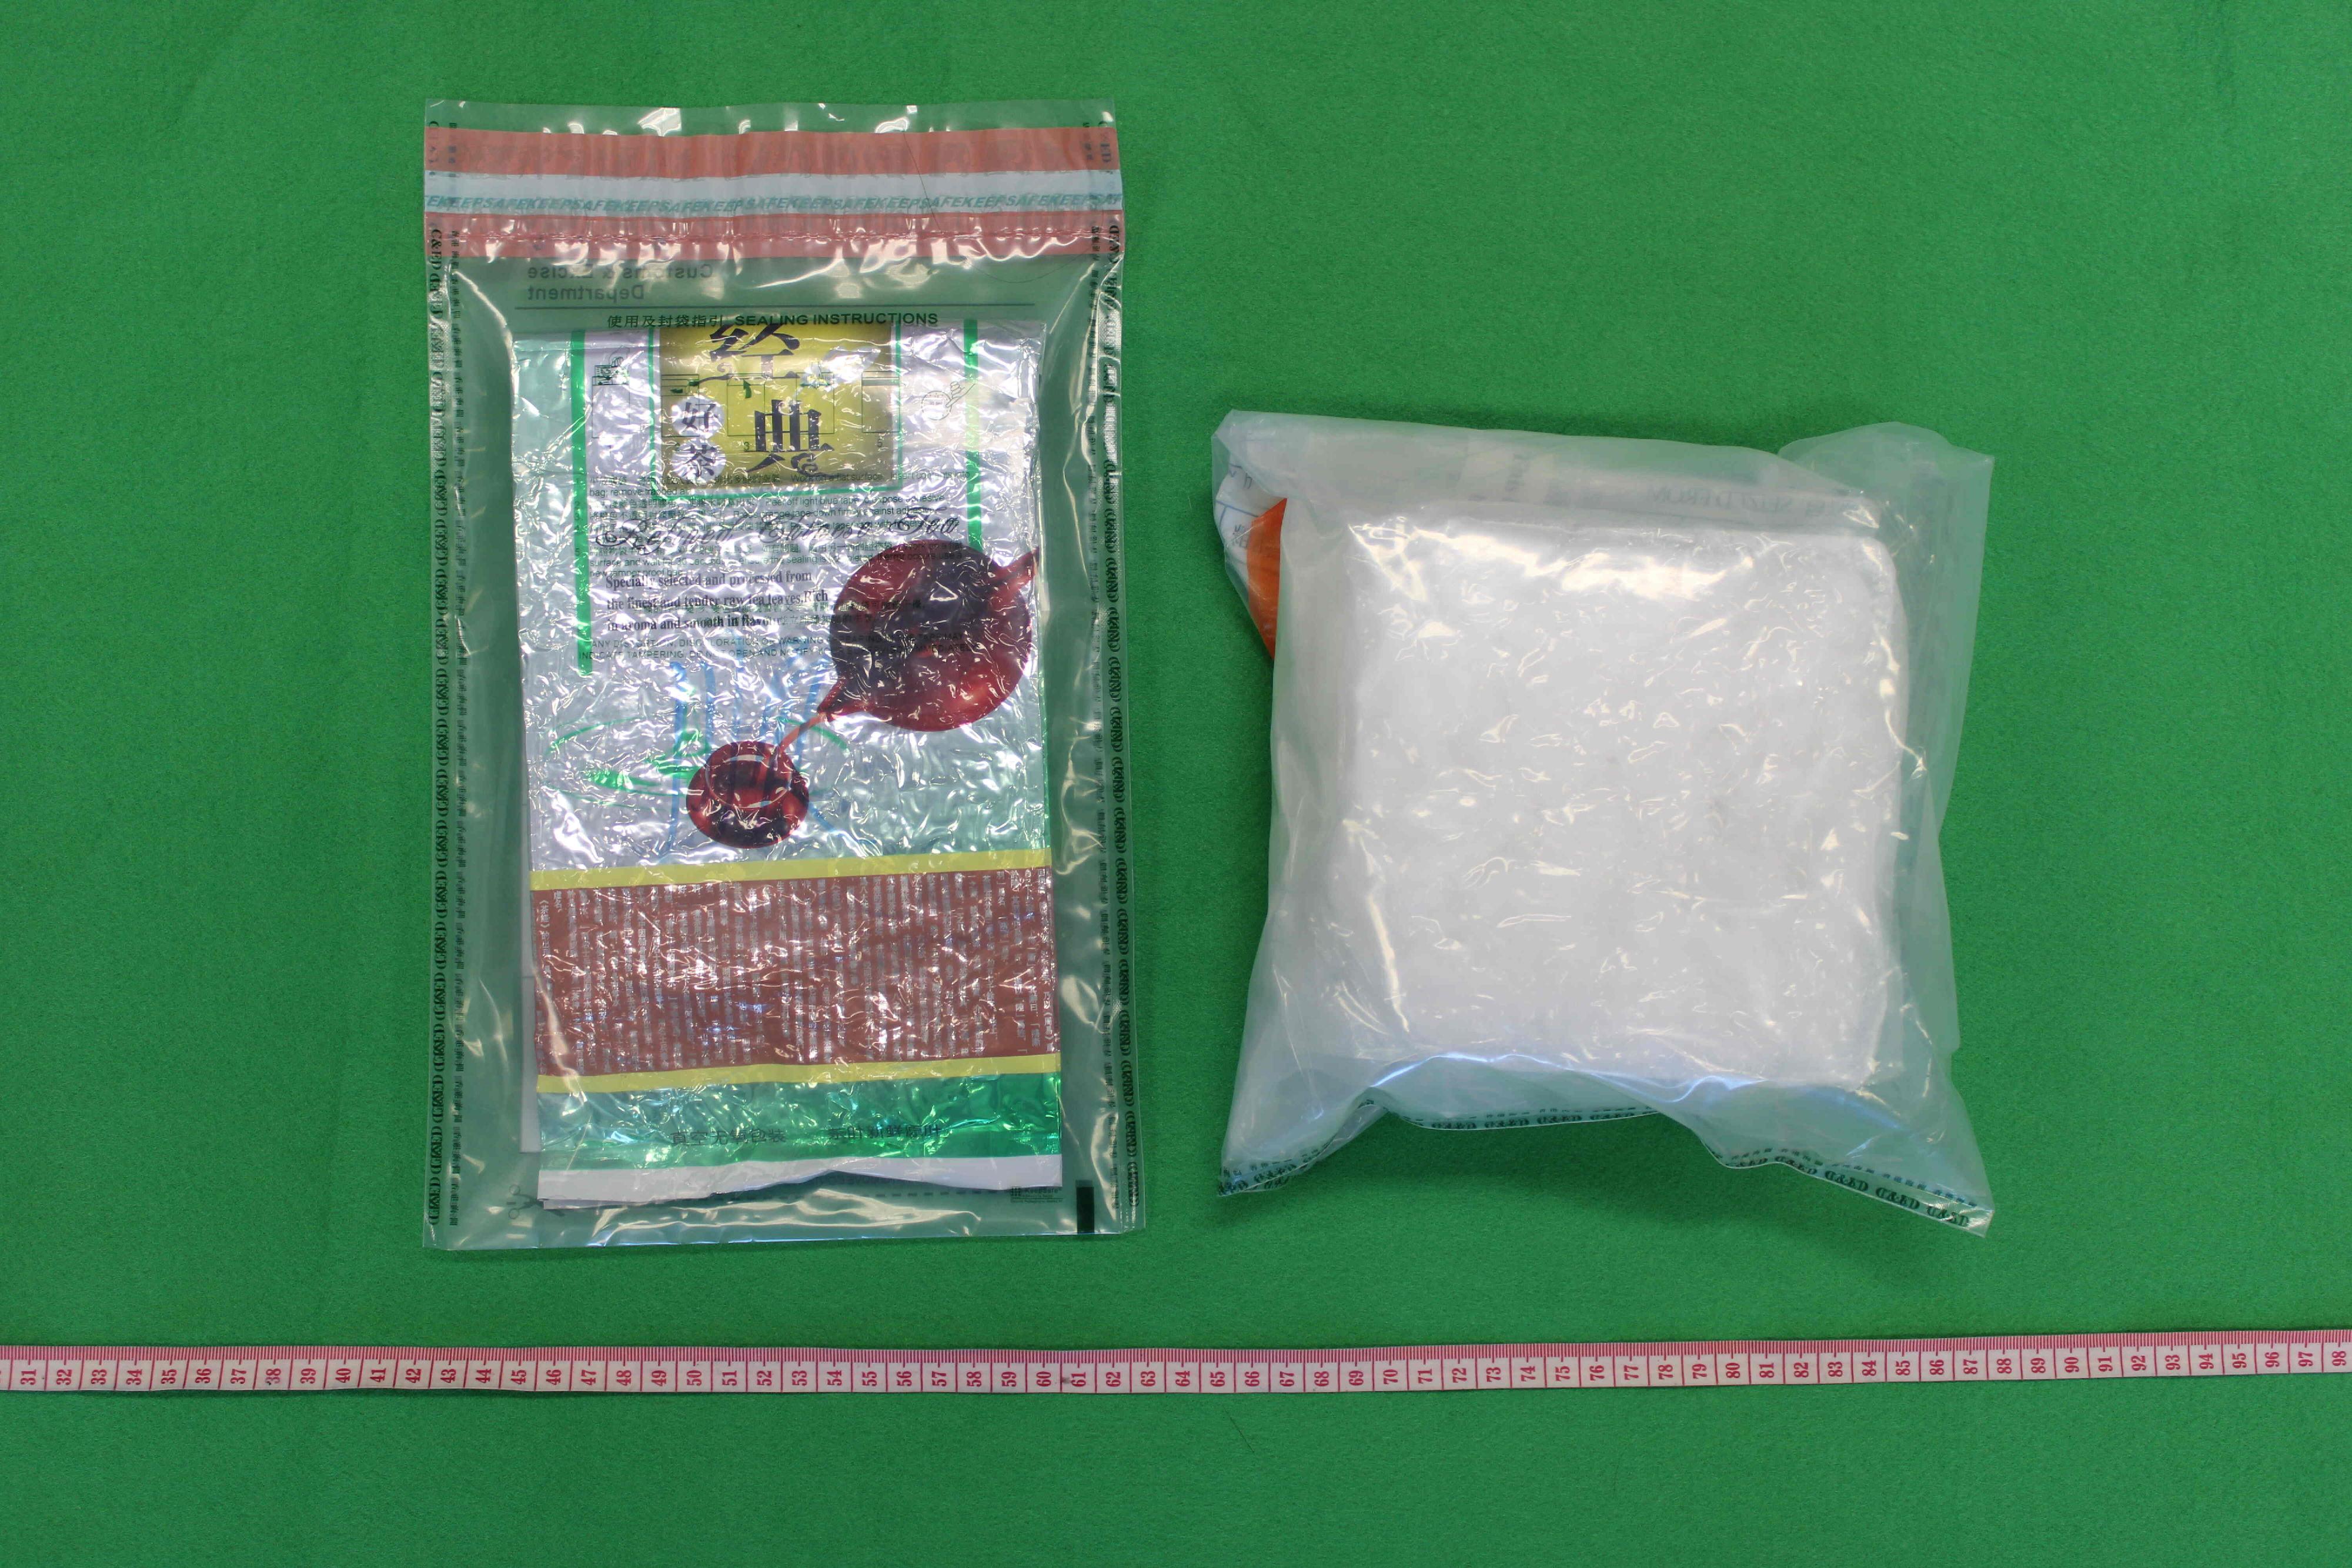 Hong Kong Customs yesterday (July 26) seized about 17 kilograms of suspected methamphetamine in Tai Po with a total estimated market value of about $7.8 million. Photo shows one of the tea leaf packaging bags with suspected methamphetamine concealed inside.